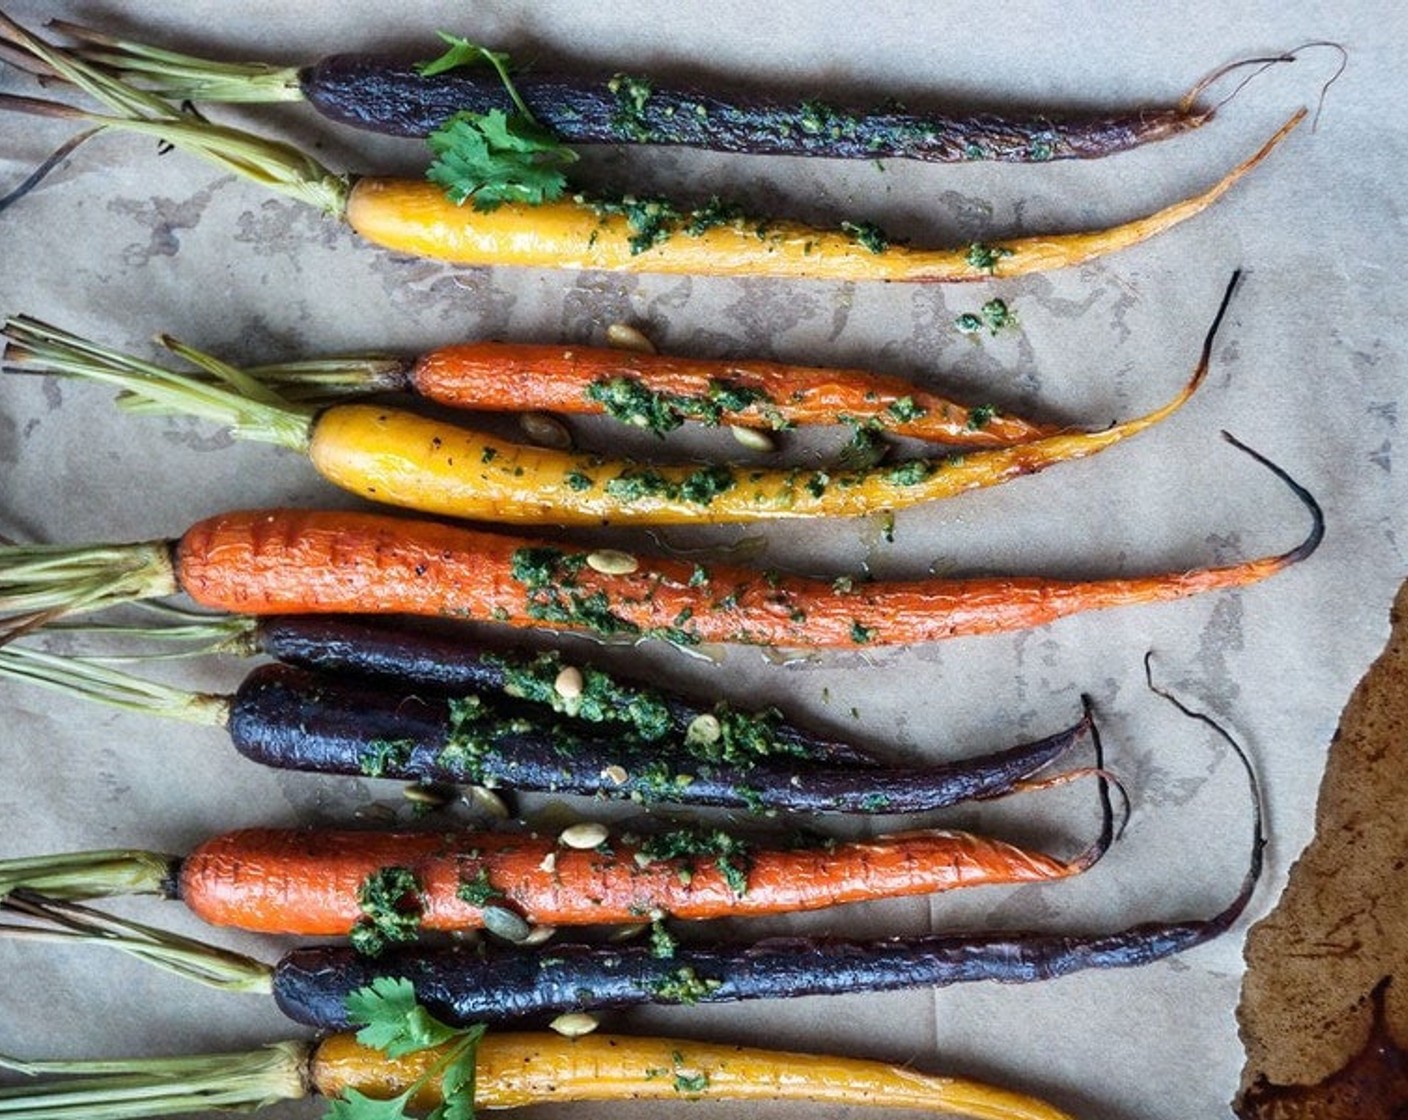 step 7 Top carrots with pesto and enjoy! Cover and store the leftover pesto in the refrigerator for up to a week.